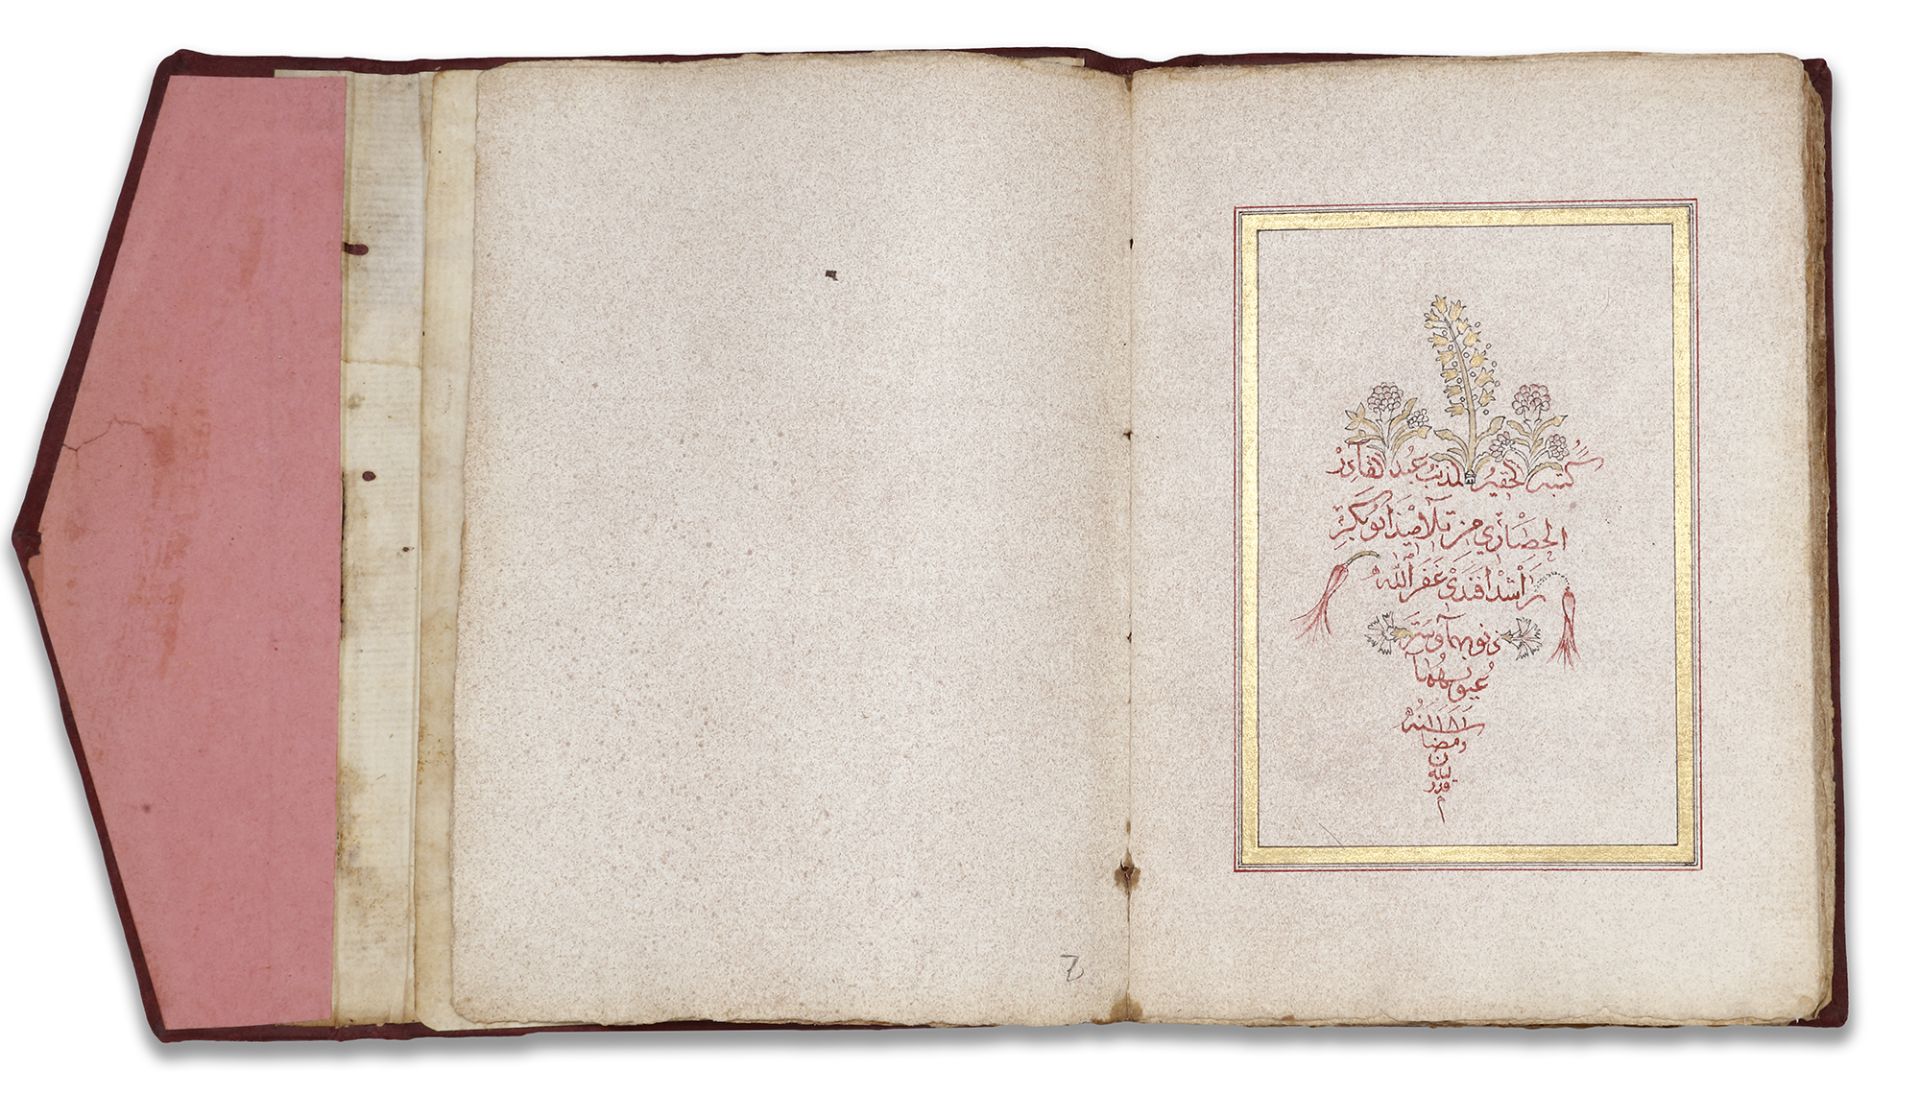 AN OTTOMAN COMPILATION OF PRAYERS AND HOLY PLACES BY ABD AL-QADIR HUSRI, OTTOMAN TURKEY, DATED 1181 - Image 11 of 12